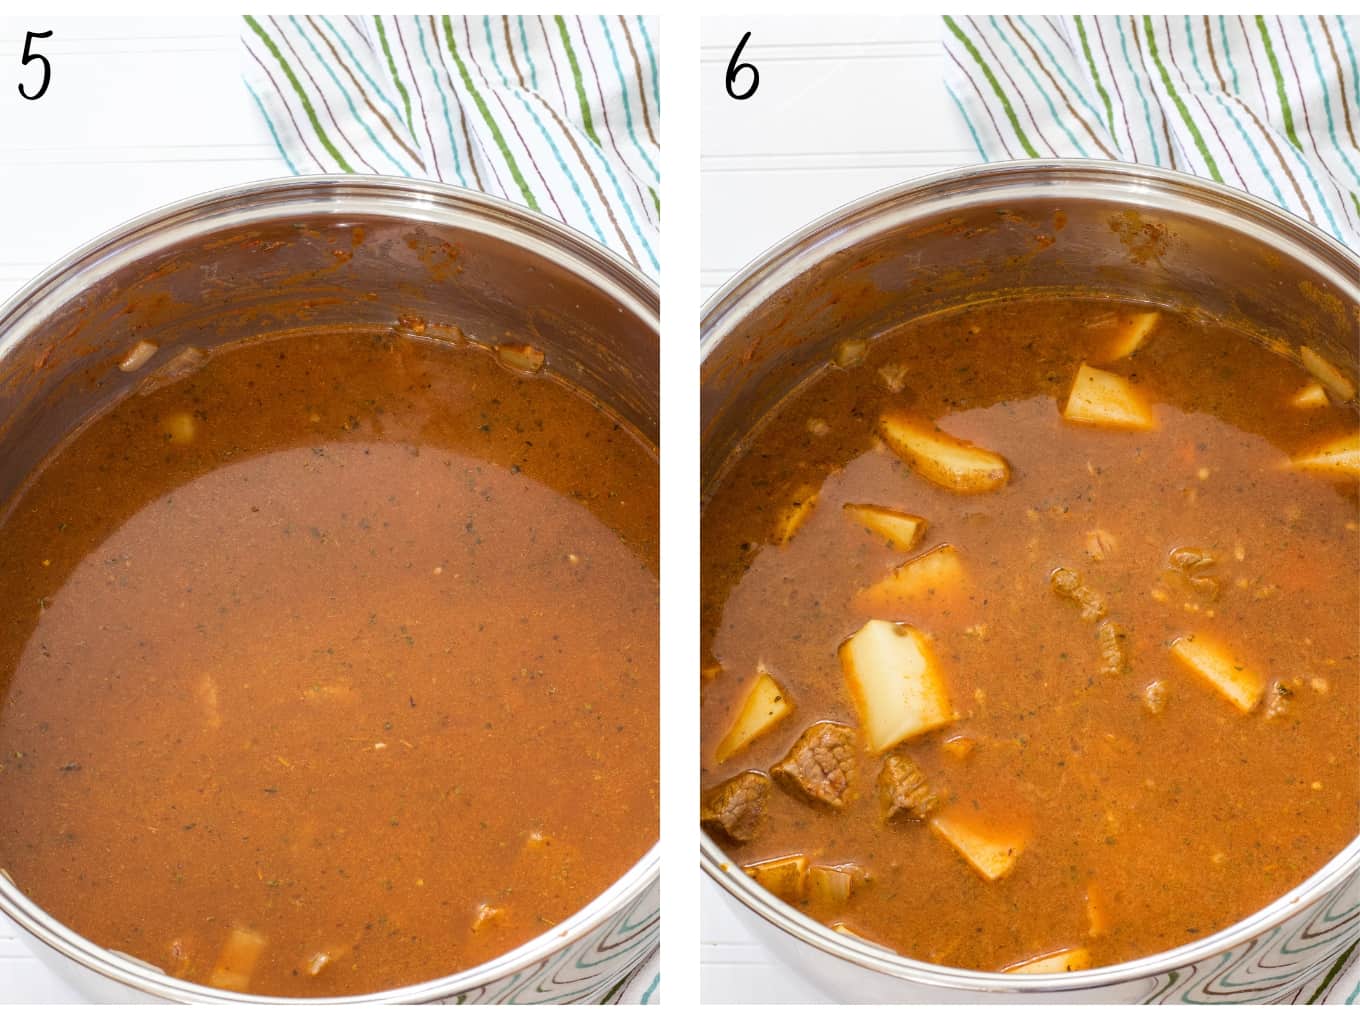 Side by side images of the broth and vegetables being added to the beef and spices.